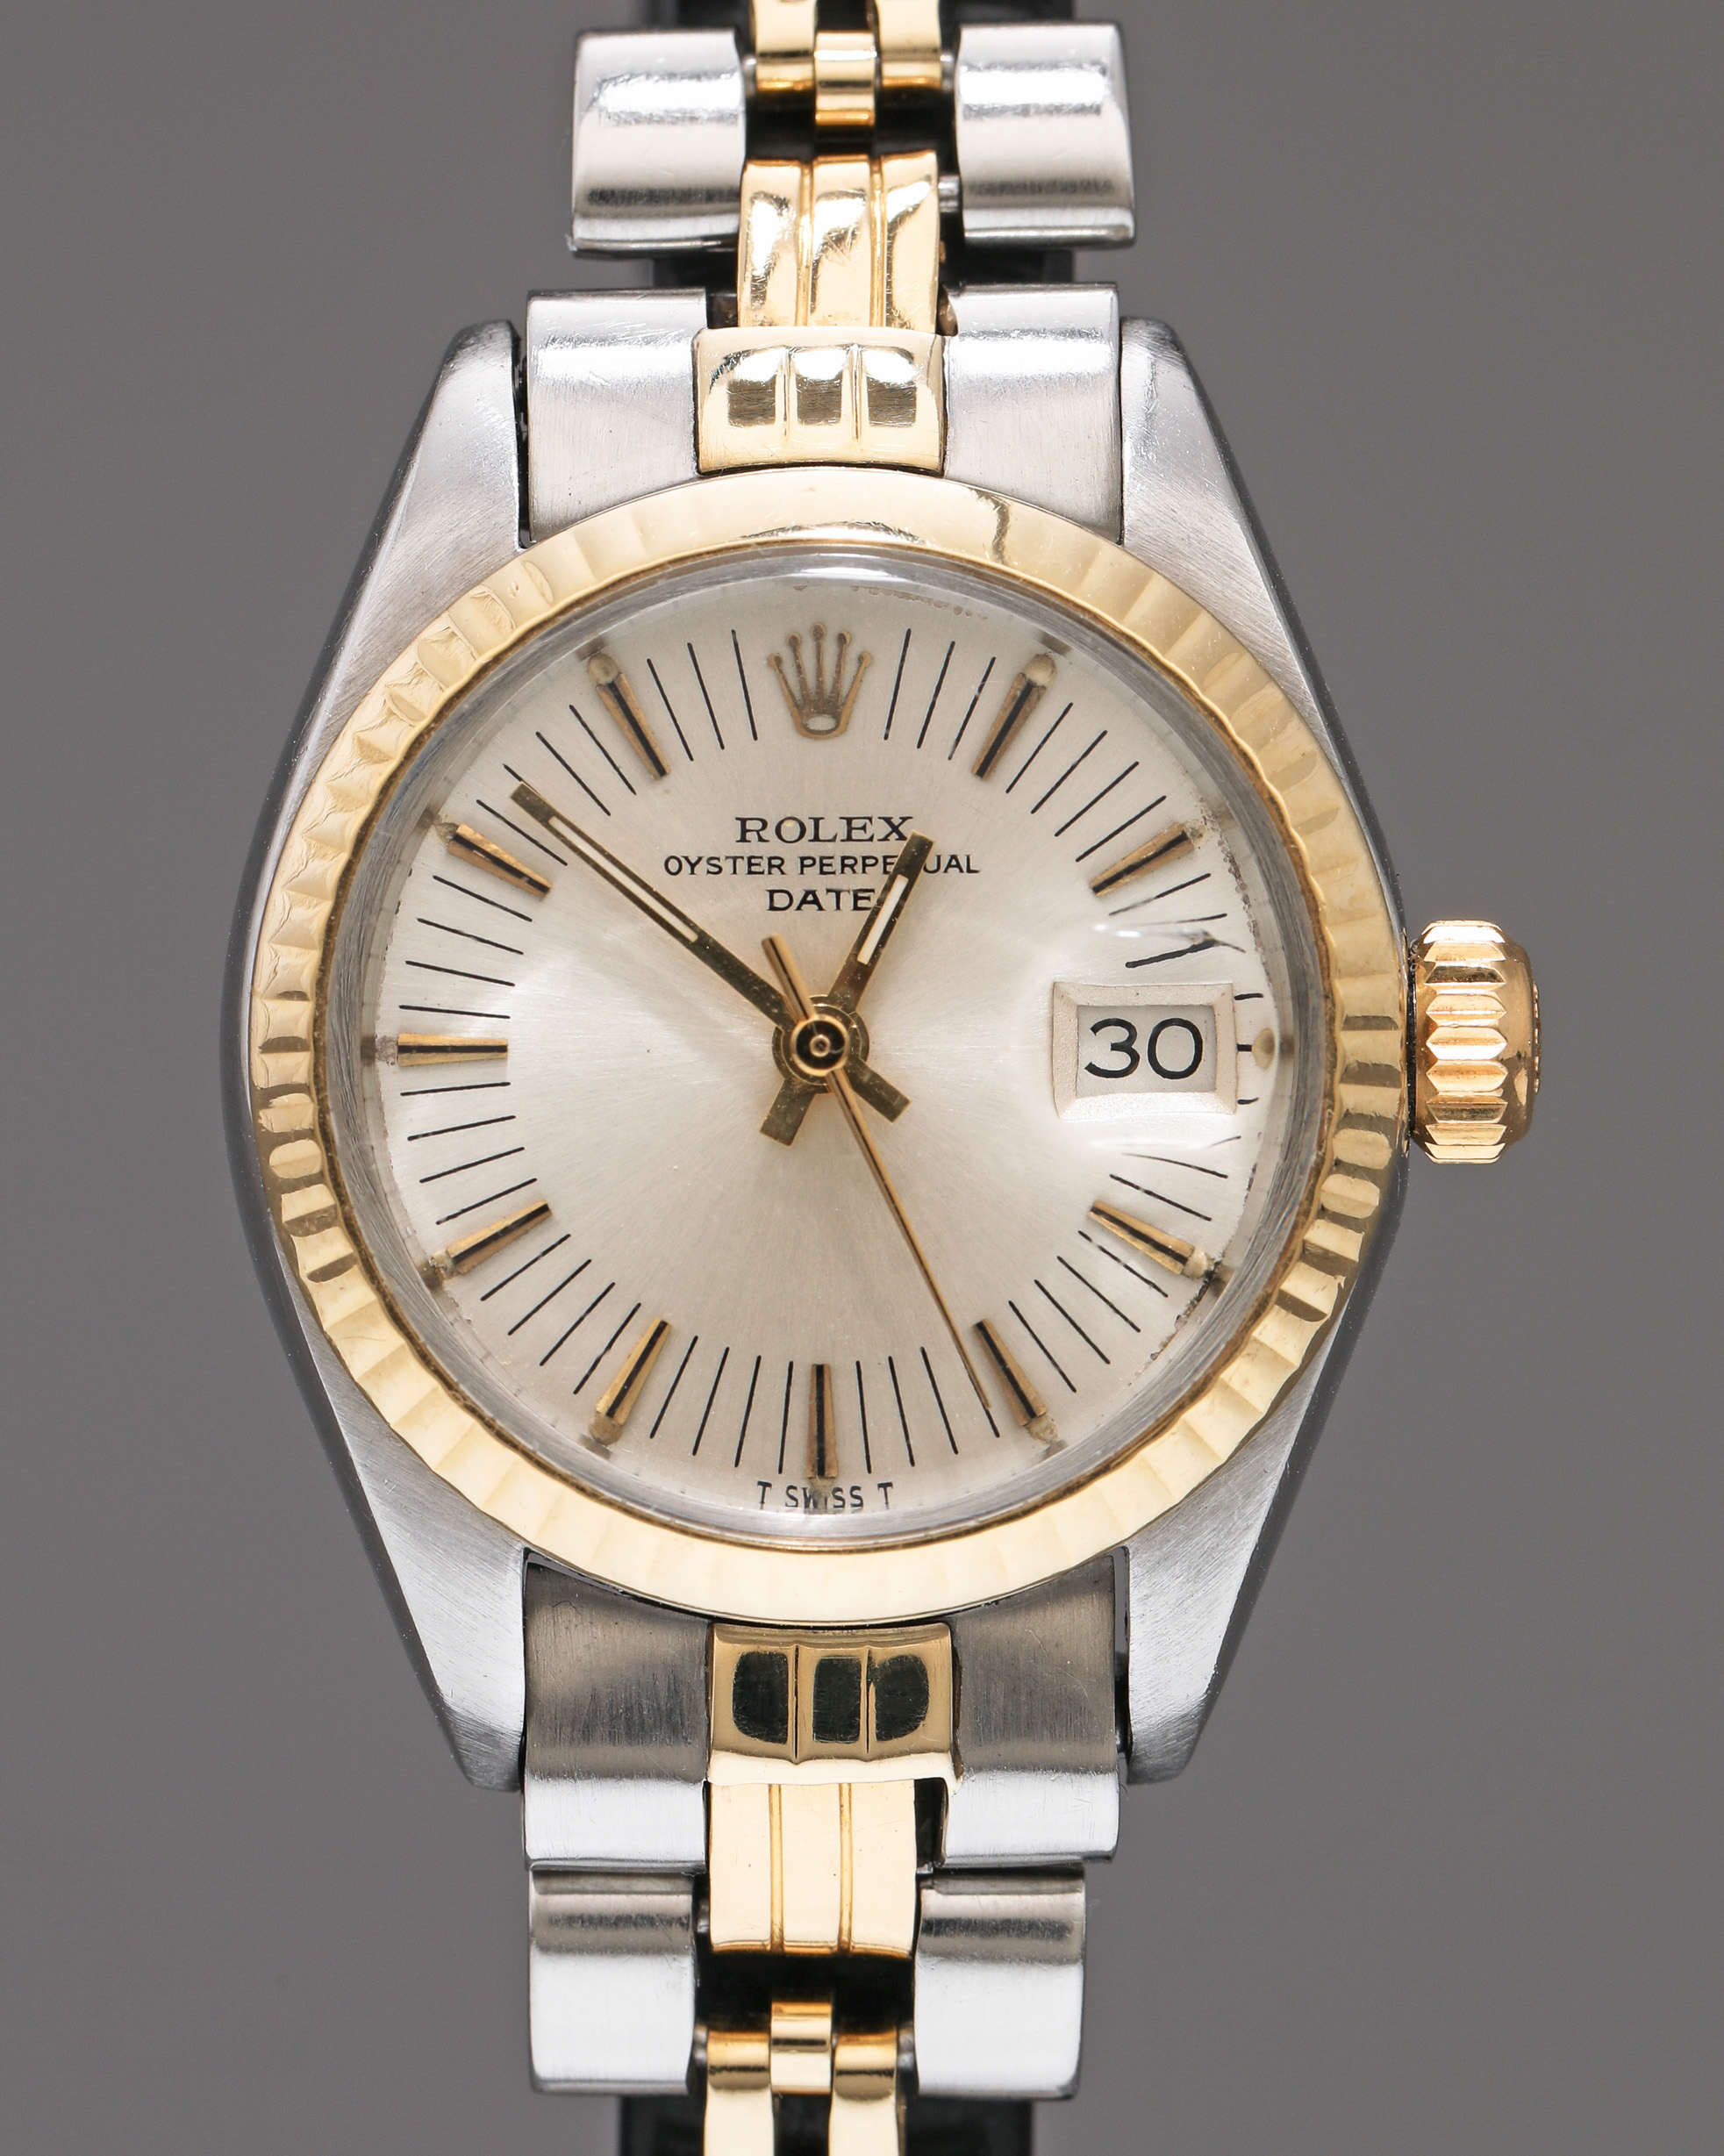 Rolex Oyster Perpetual Lady Date Ref. 6917. Automatic women's watch - Image 2 of 9